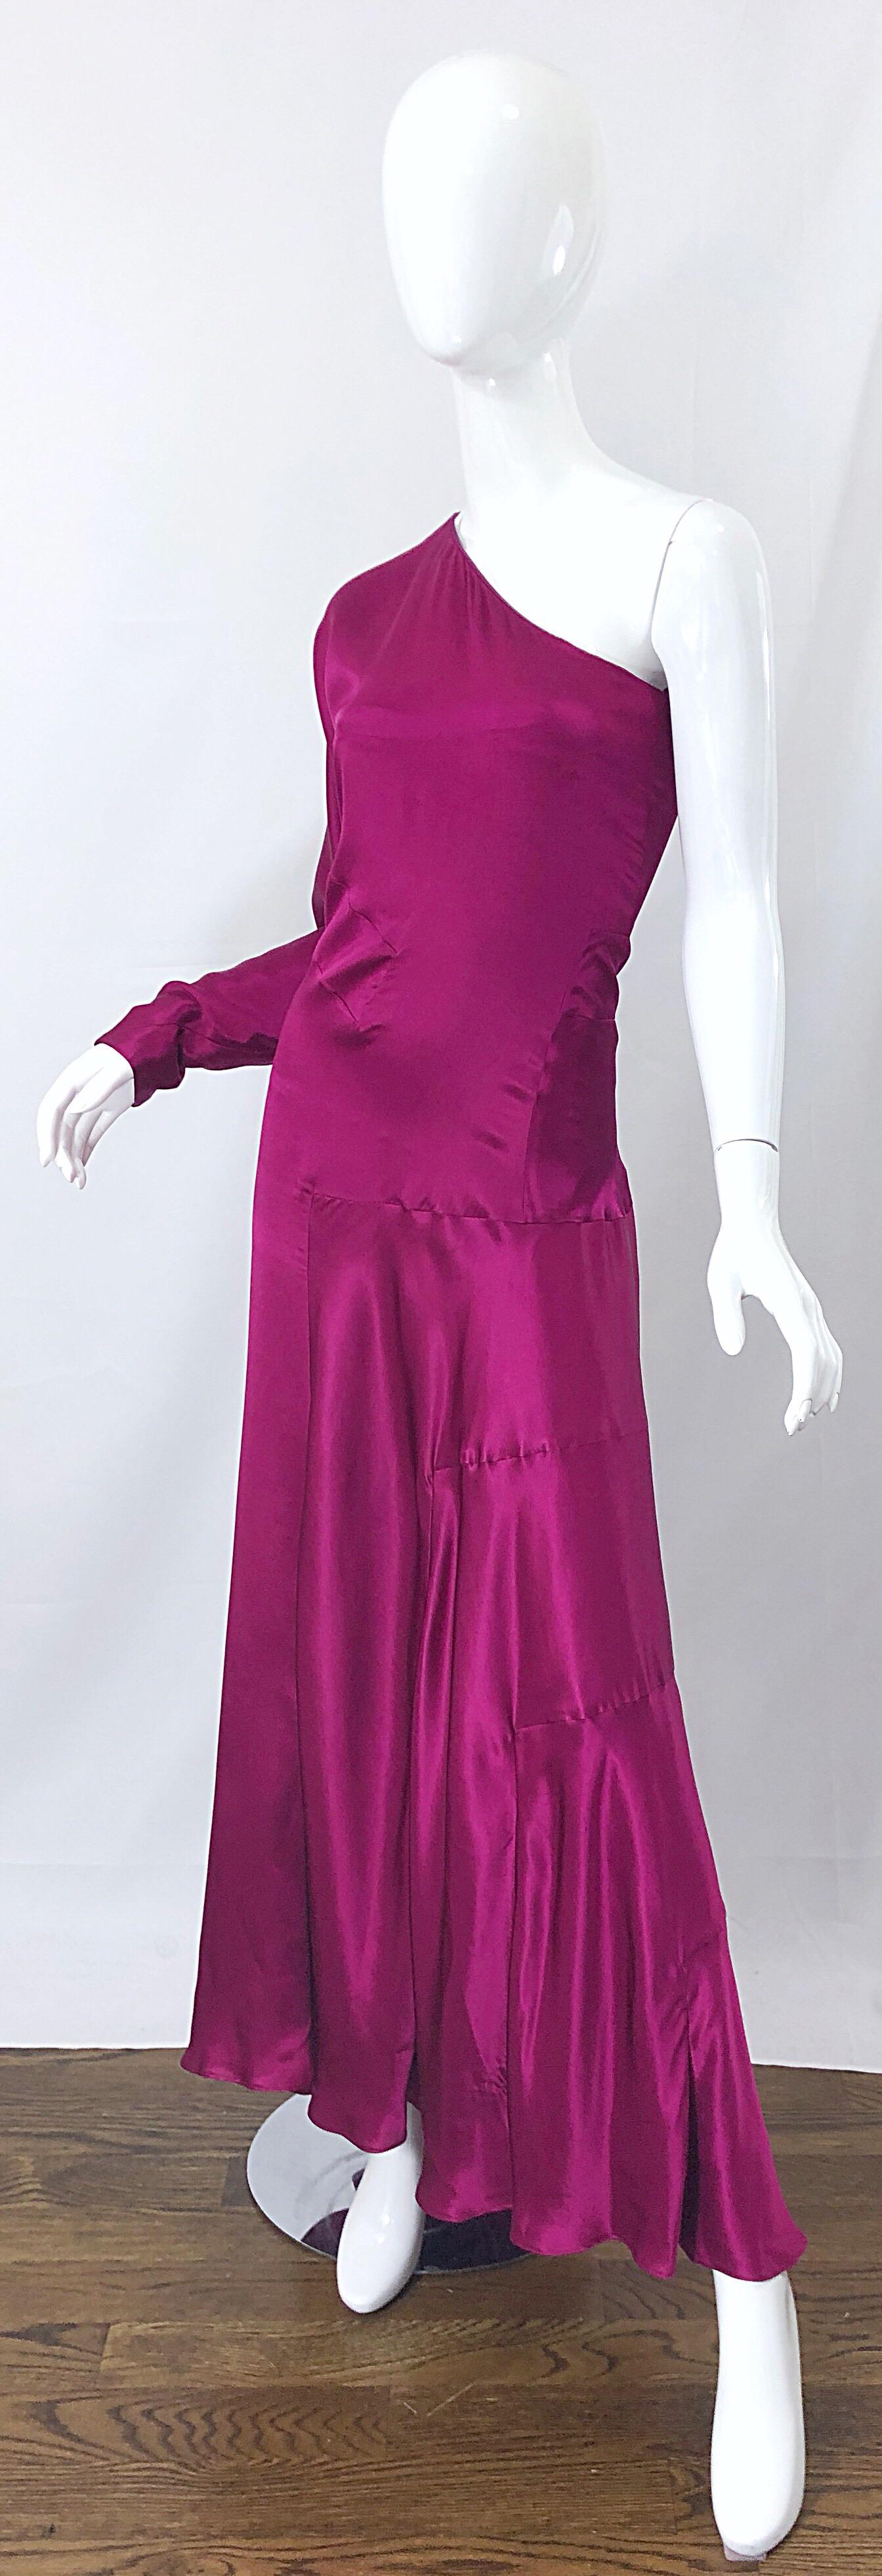 Yves Saint Laurent SS 2008 Kate Moss Sz 40 / 8 One Shoulder Silk Rasperry Gown For Sale 1